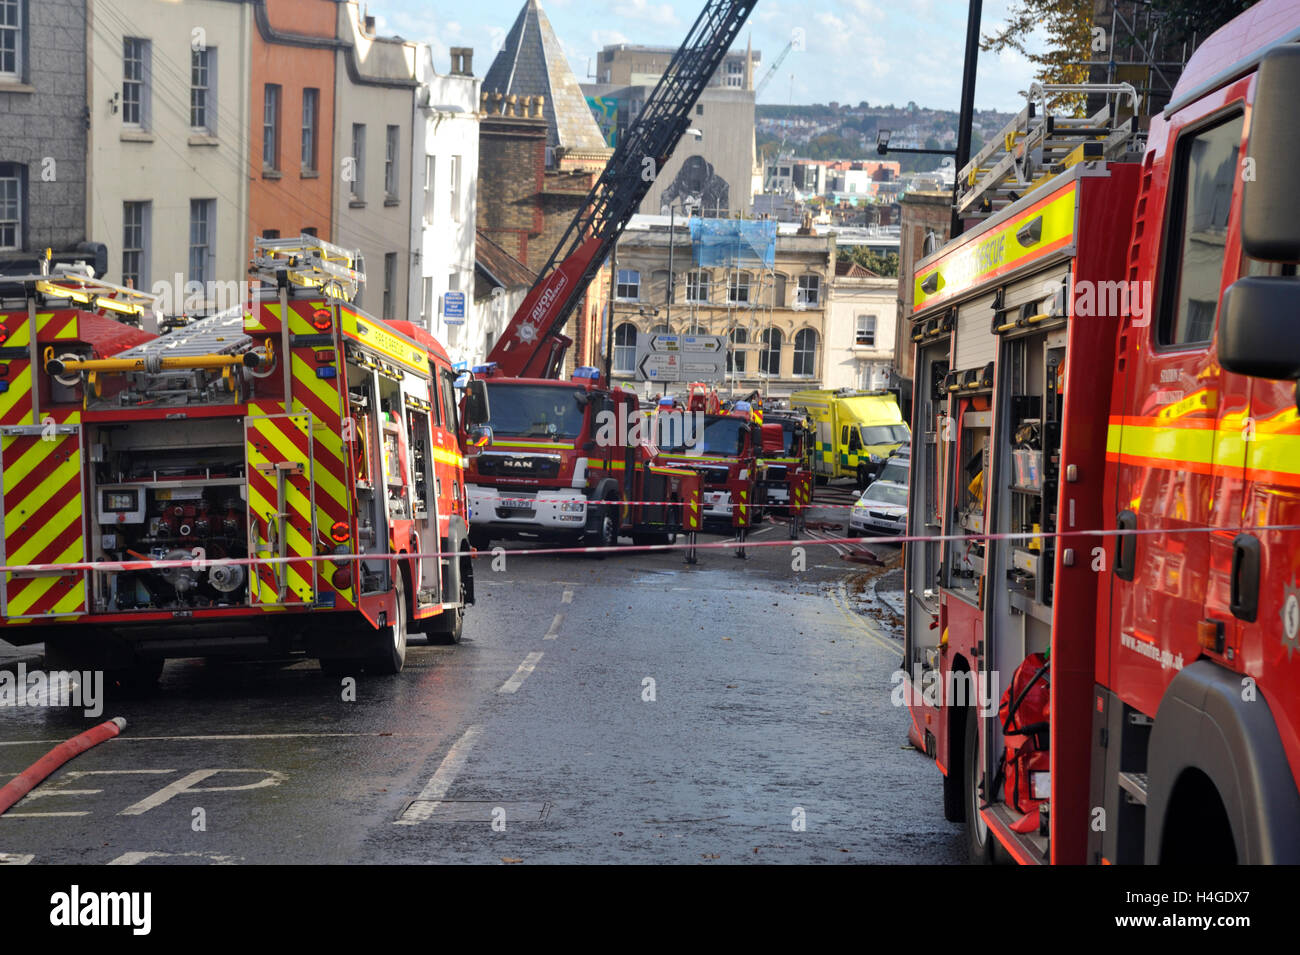 Bristol, UK. 16th October, 2016. St Michael's on the Mount Church Without, a grade II listed building from the seventeen hundreds in central Bristol, England, UK, located on St Michael's Hill,  16 October 2016.  Multiple fire engines including two ladder rigs, a number of ambulances and police attended the fire. The church has been boarded up for 17 years with temporary uses during this time but had squatters and graffiti taggers broke in a few days ago.  The roof and much of interior has been destroyed. The cause of the fire is not yet known. Credit: Charles Stirling/Alamy Live News Stock Photo